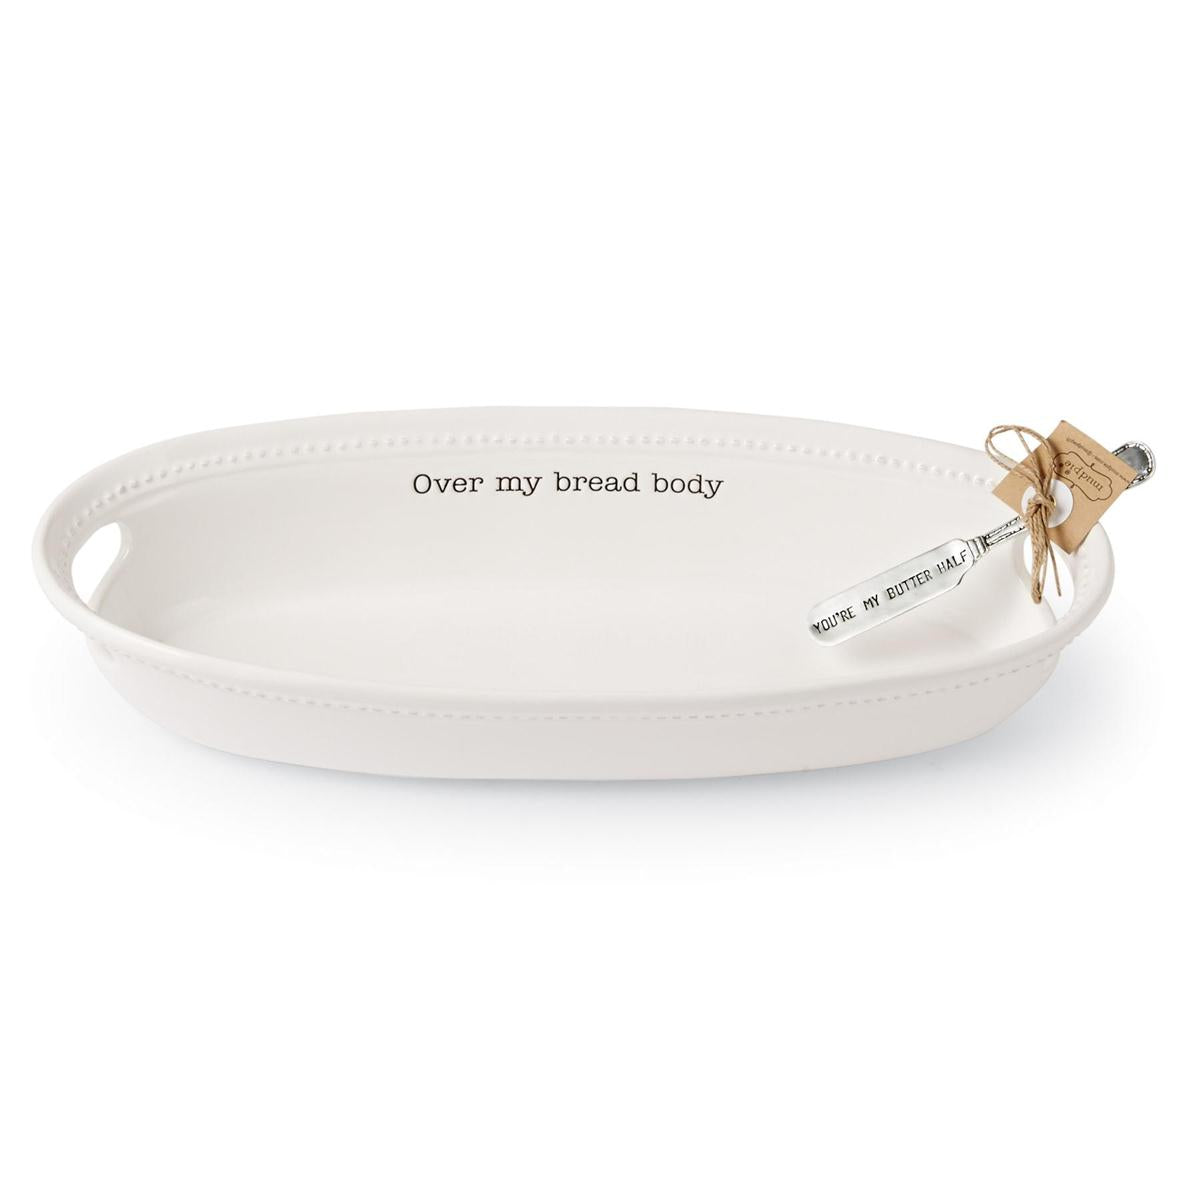 Over My Bread Body Serving Set Tray Mud Pie   